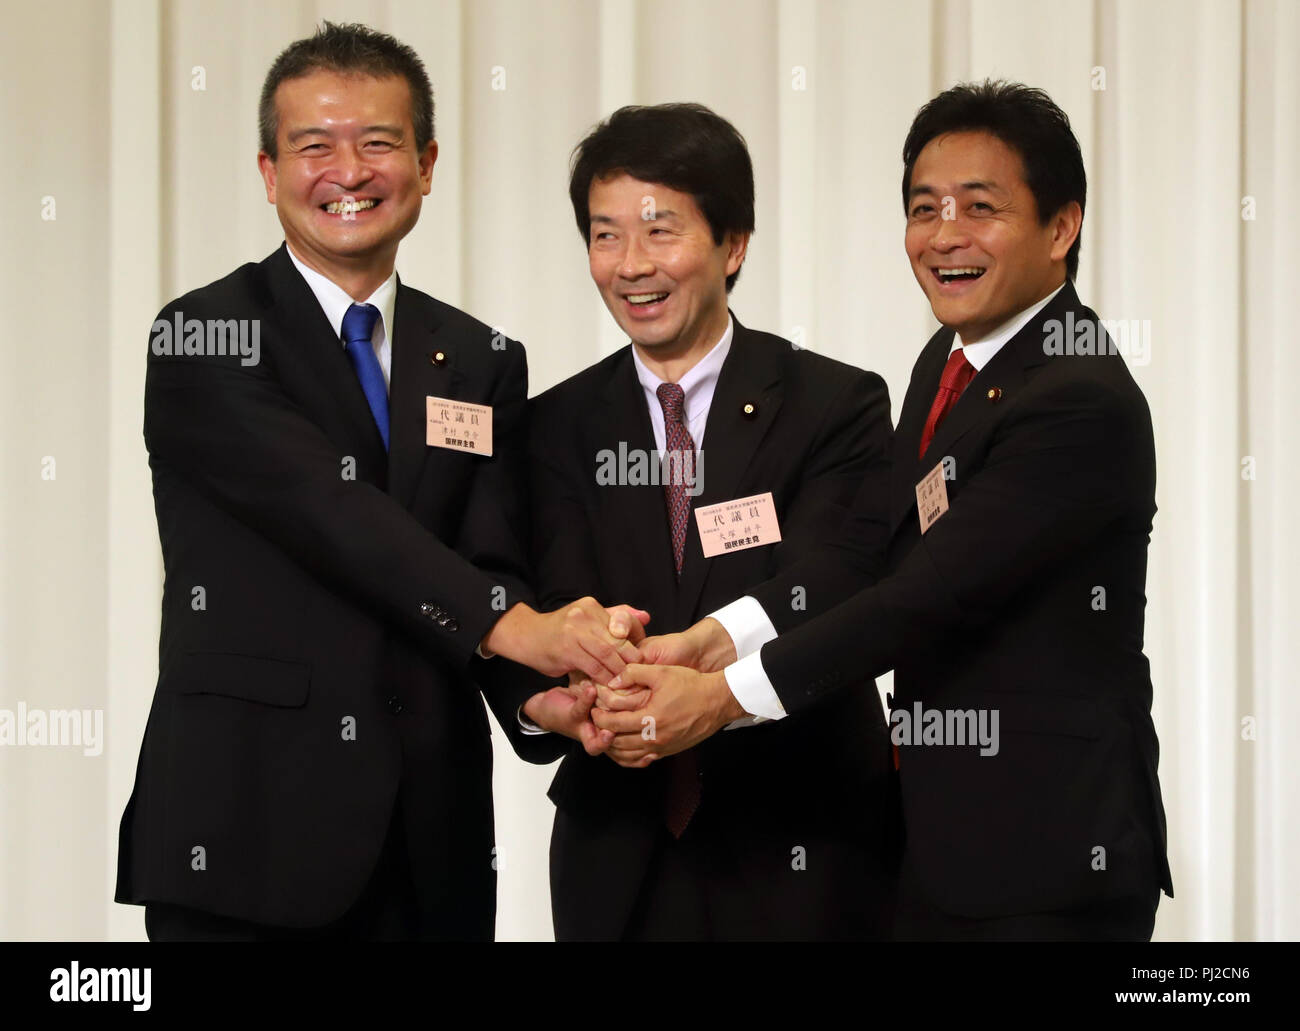 Tokyo, Japan. 4th Sep, 2018. Japan's second largest opposition Democratic Party for the People president Kohei Otsuka (C) shakes hands with the new president Yuichiro Tamaki (R) and and another candidate Keisuke Tsumura (L) after Tamaki was elected at the party convention in Tokyo on Tuesday, September 4, 2018. The Democratic Party for the People was formed in May as merger of Democratic Party of Japan and Party of Hope. Credit: Yoshio Tsunoda/AFLO/Alamy Live News Stock Photo